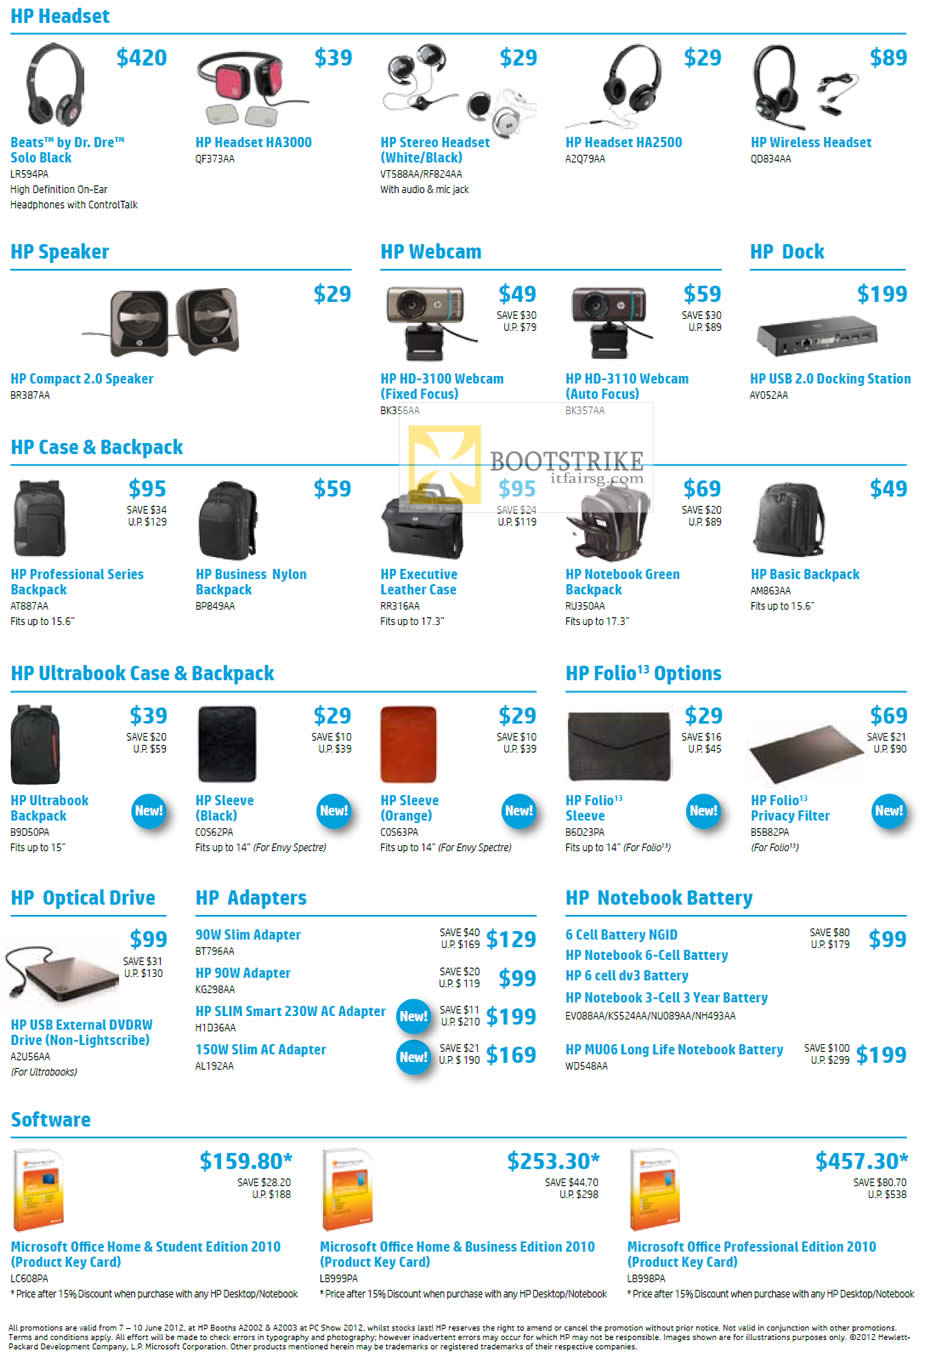 PC SHOW 2012 price list image brochure of HP Accessories Headset, Speaker, Webcam, Case, Backpack, External Optical Drive, Folio, Power Adapters, Notebook Battery, Microsoft Office Software